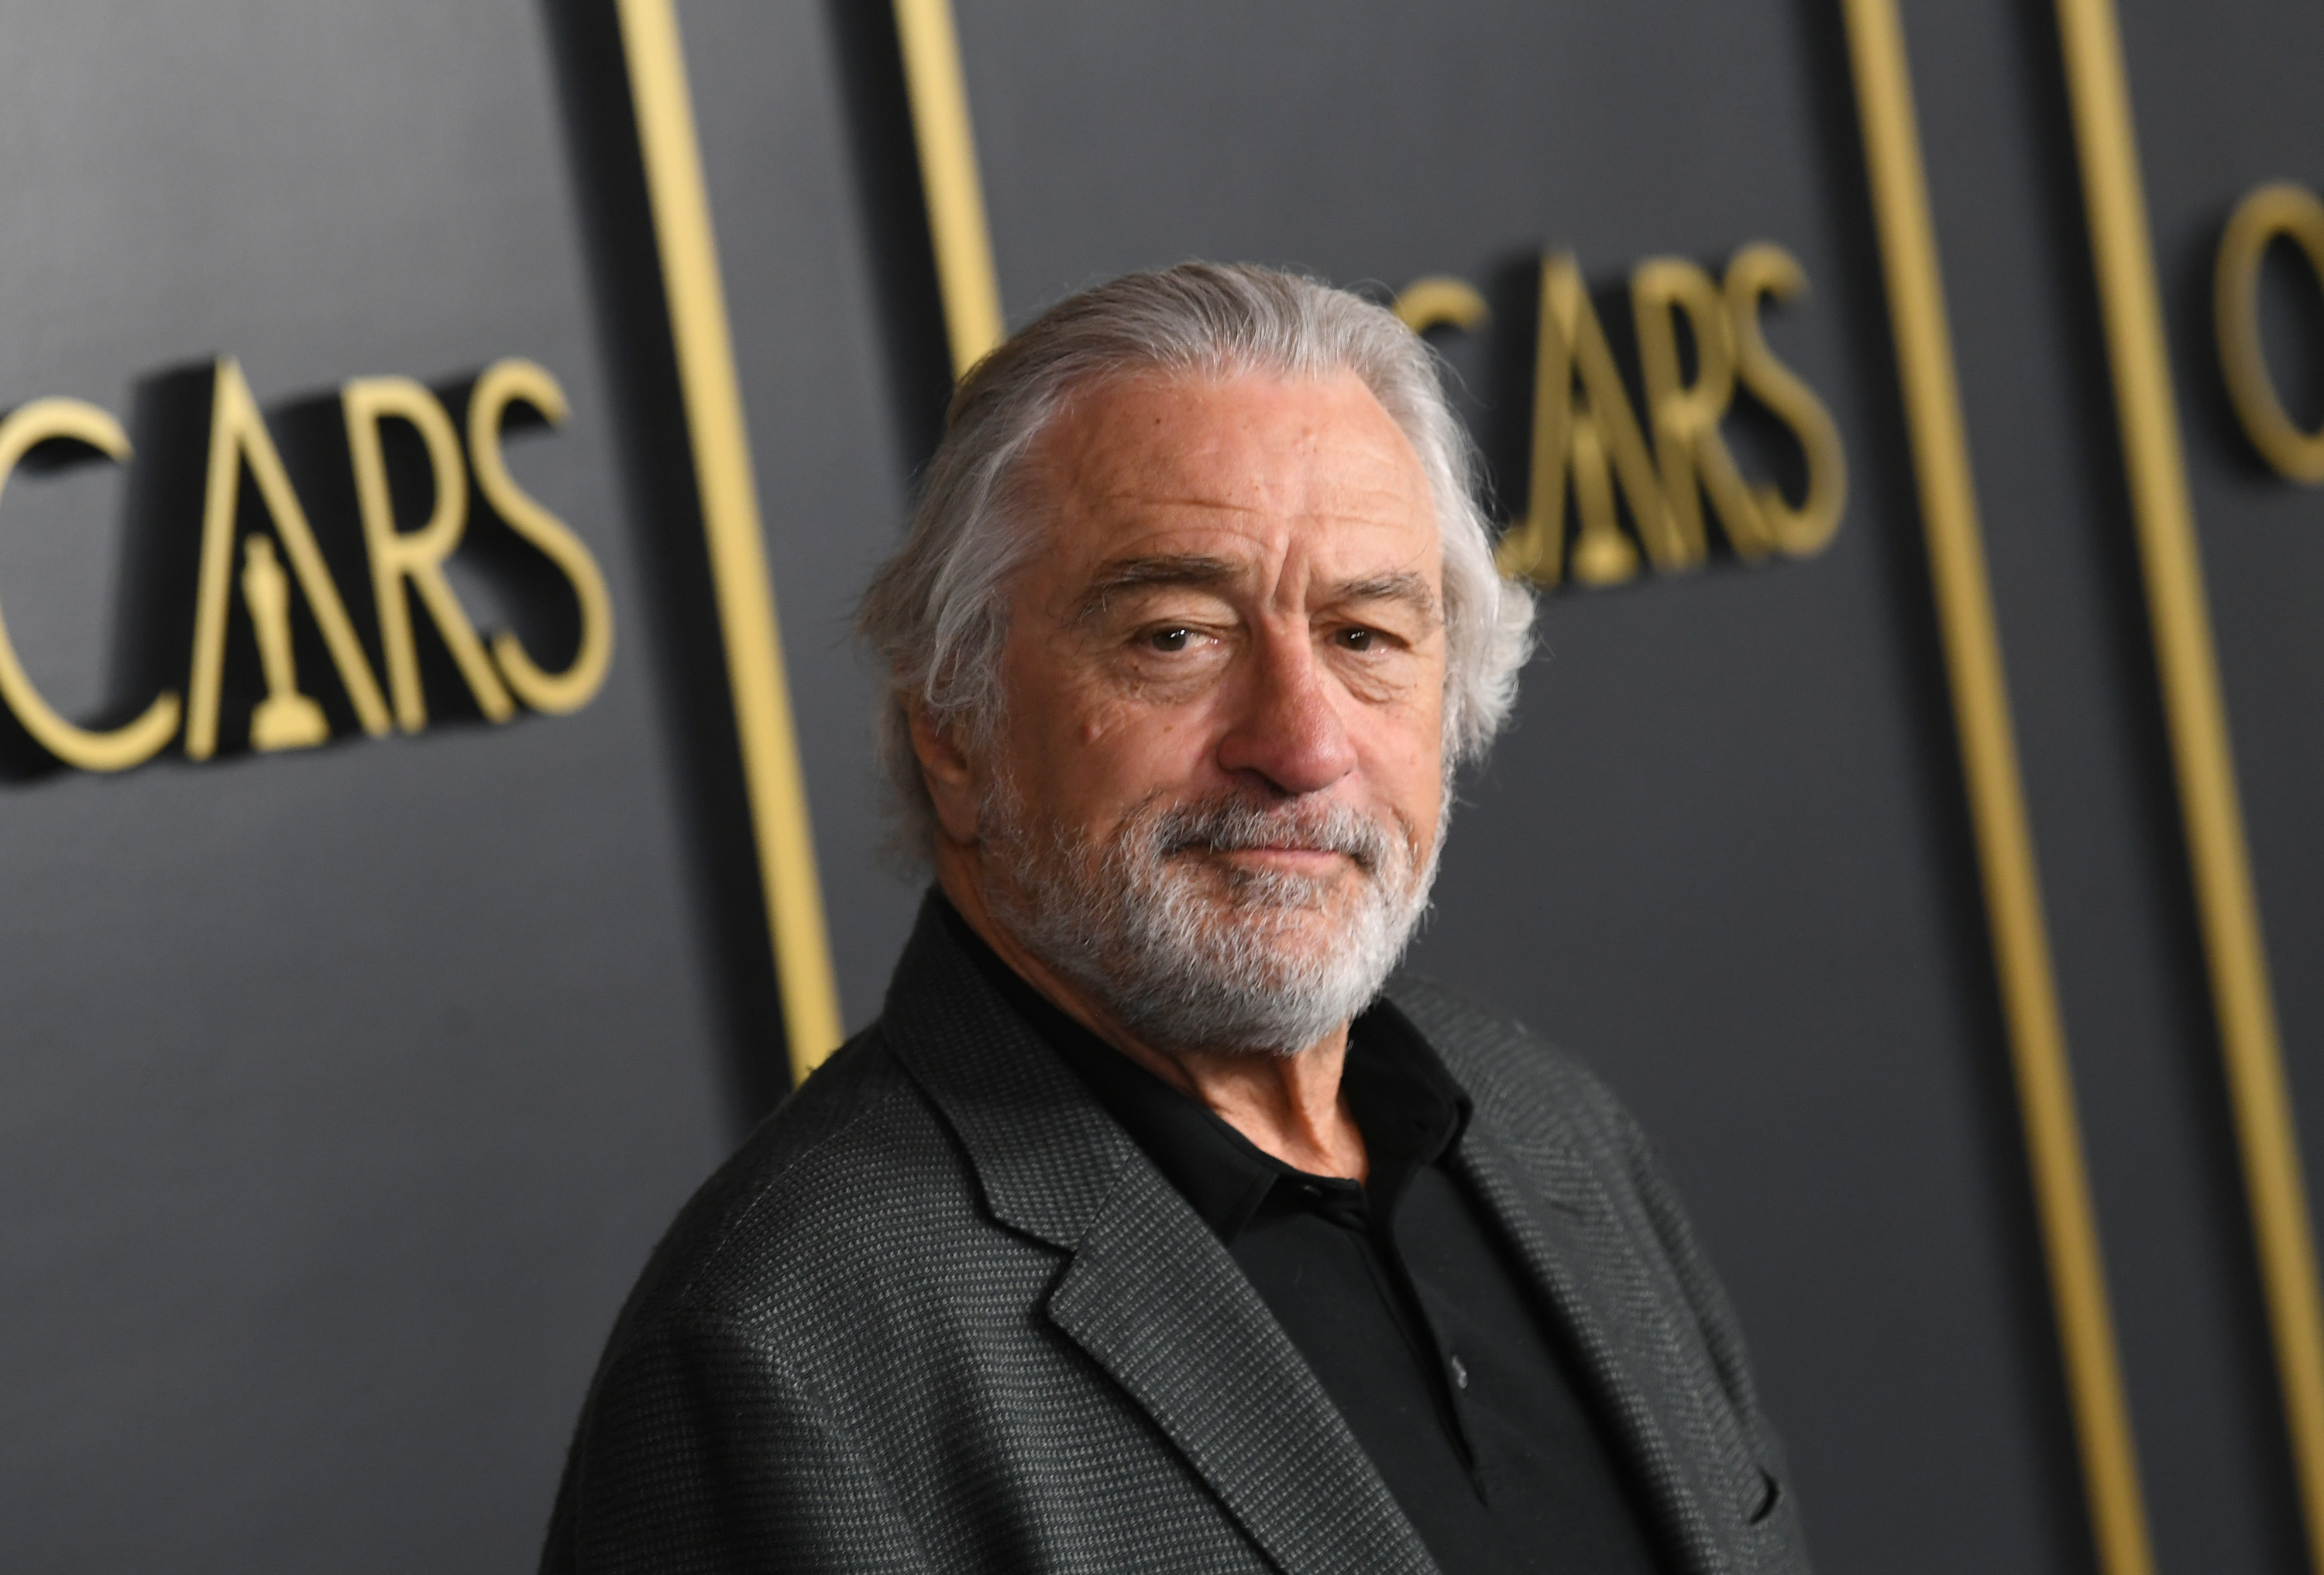 Robert De Niro in Hollywood, California on January 27, 2020 | Source: Getty Images